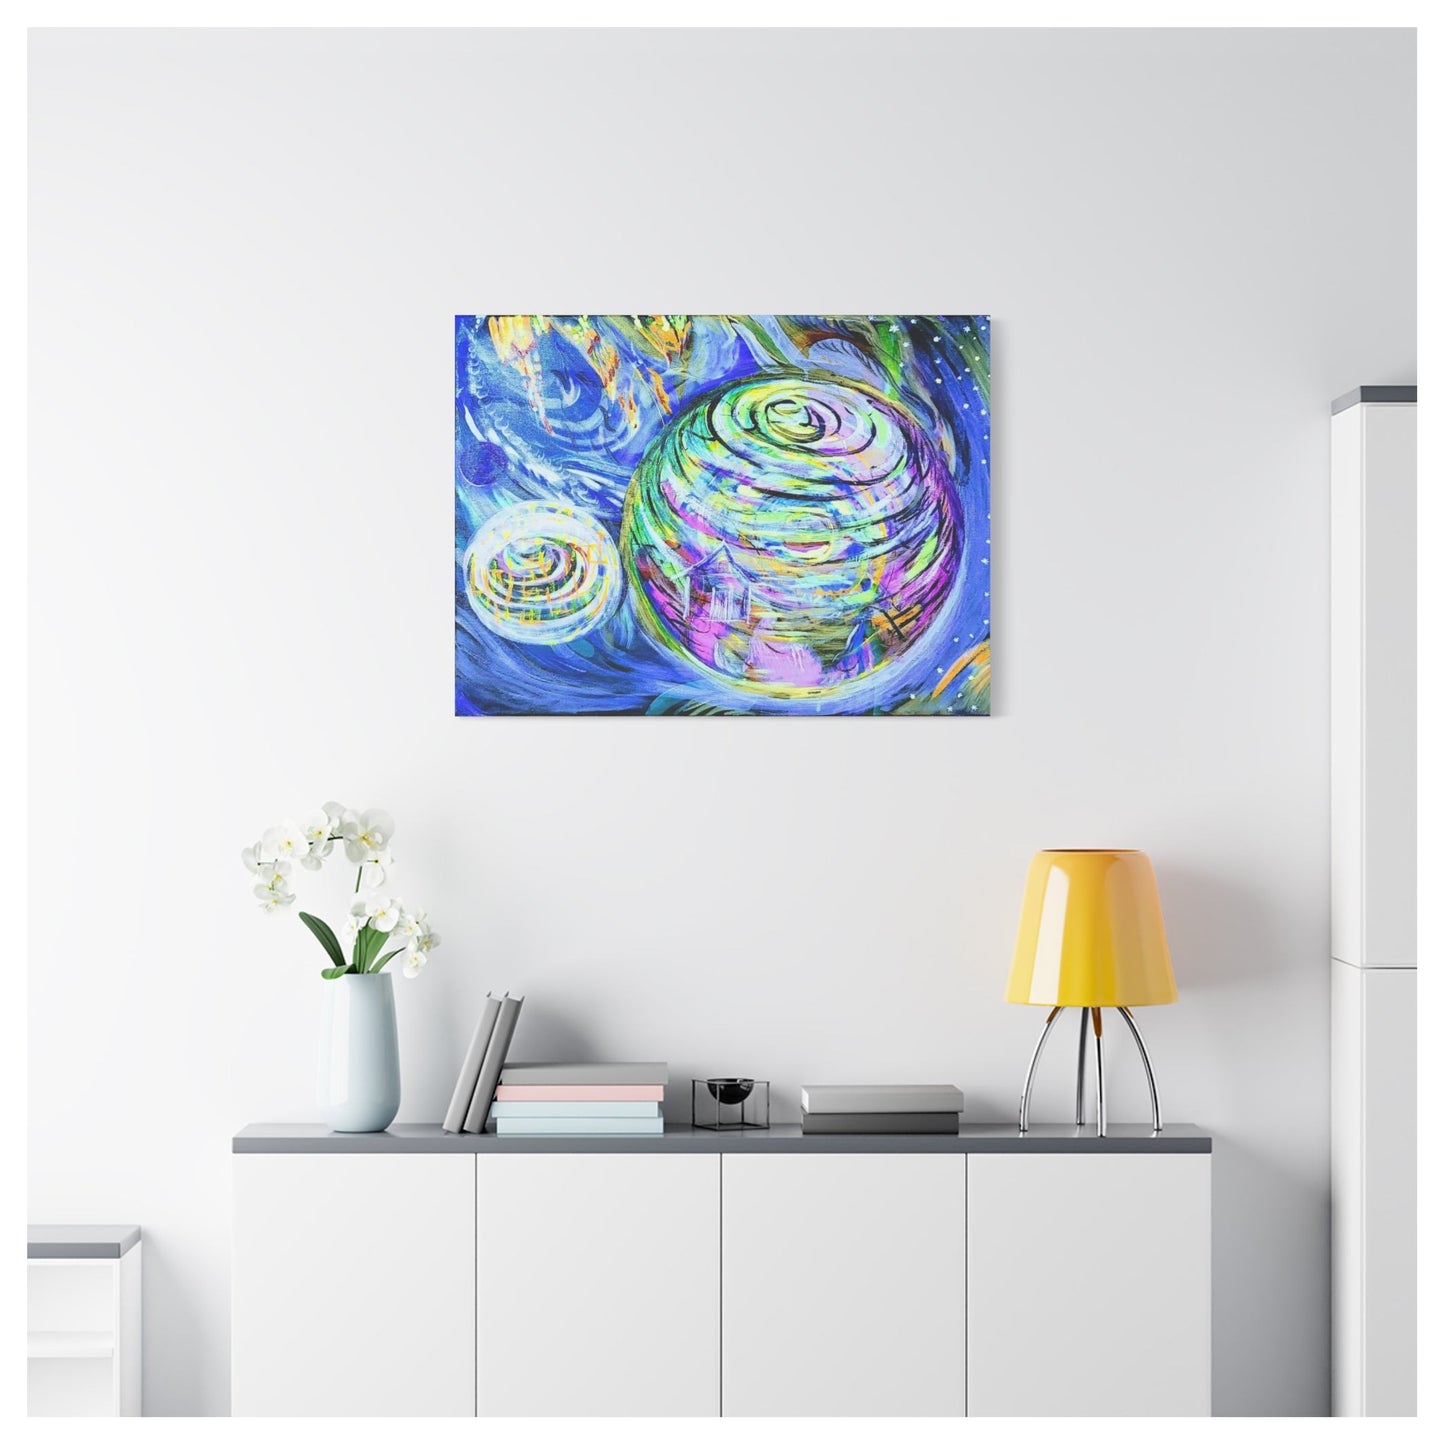 Cosmic Universe - Unique, Original Handmade Painting, Home Decor Abstract Wall Art | 24" x 18"